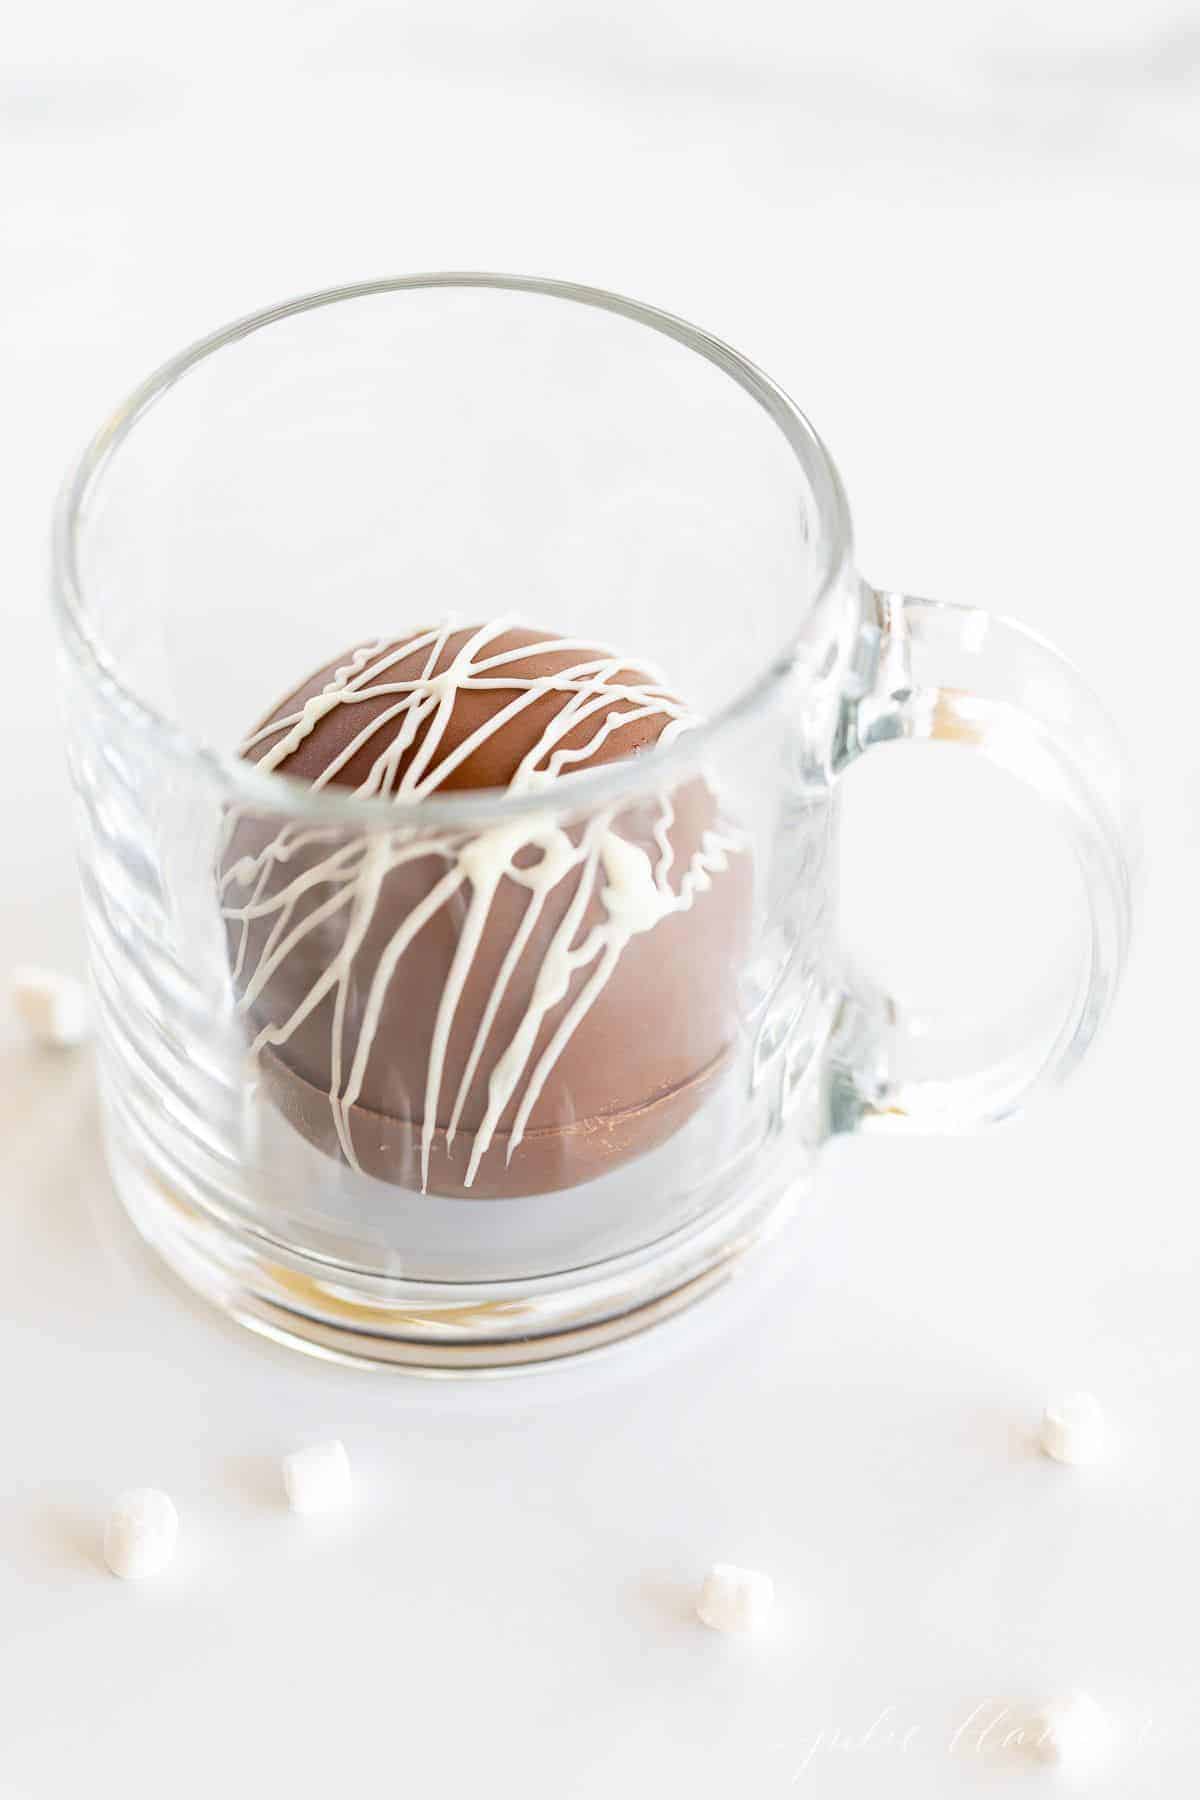 A clear glass mug with a single hot chocolate bomb inside, marshmallows surrounding mug on a marble surface.